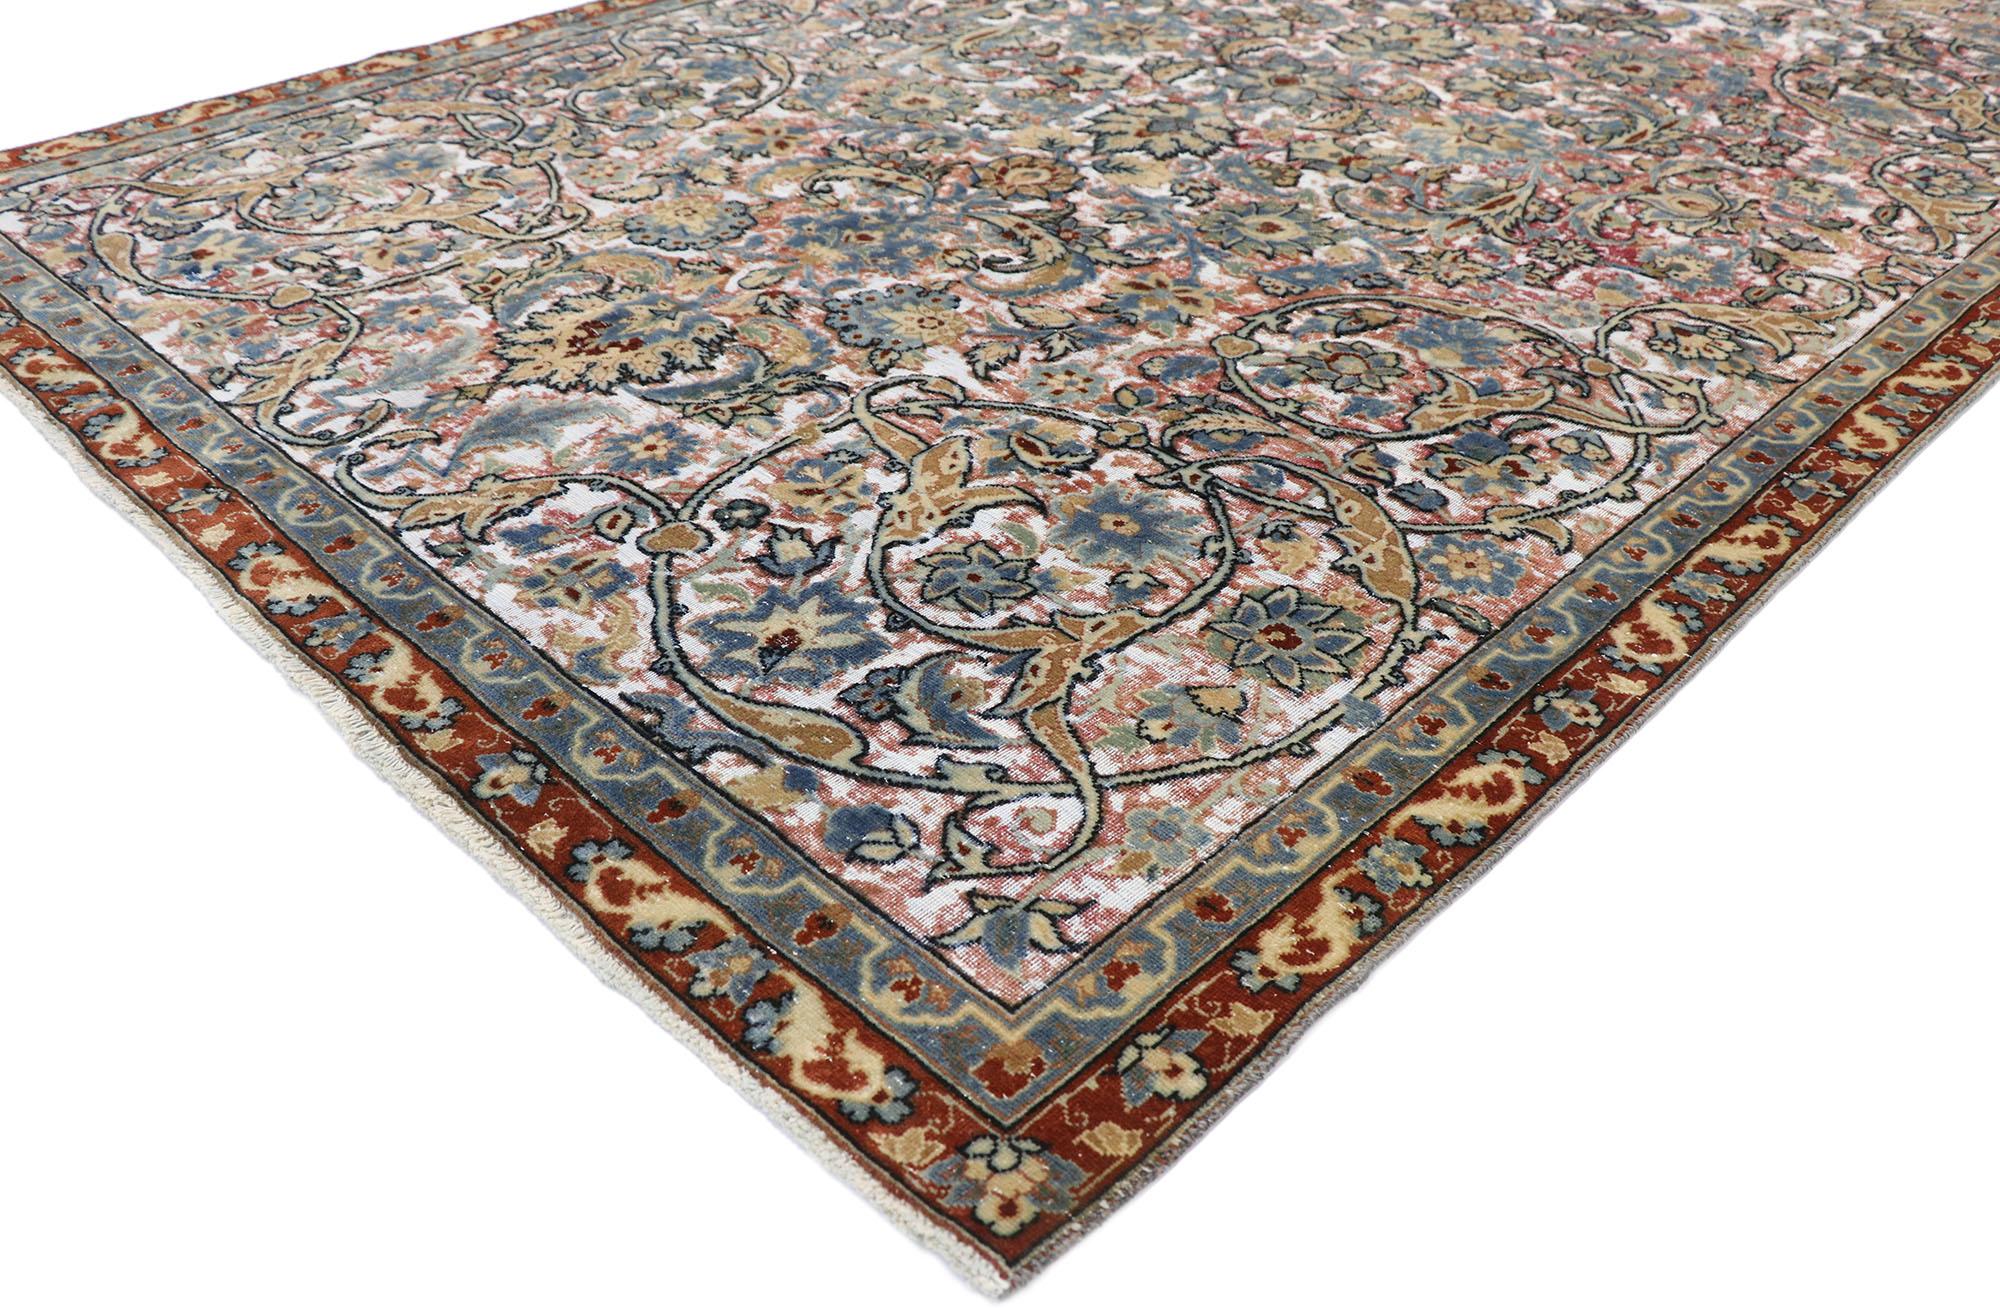 60824, distressed antique Persian Tabriz rug with Modern Rustic English style. Cleverly composed and distinctively well-balanced, this hand knotted wool distressed antique Persian Tabriz rug will take on a curated lived-in look that feels timeless